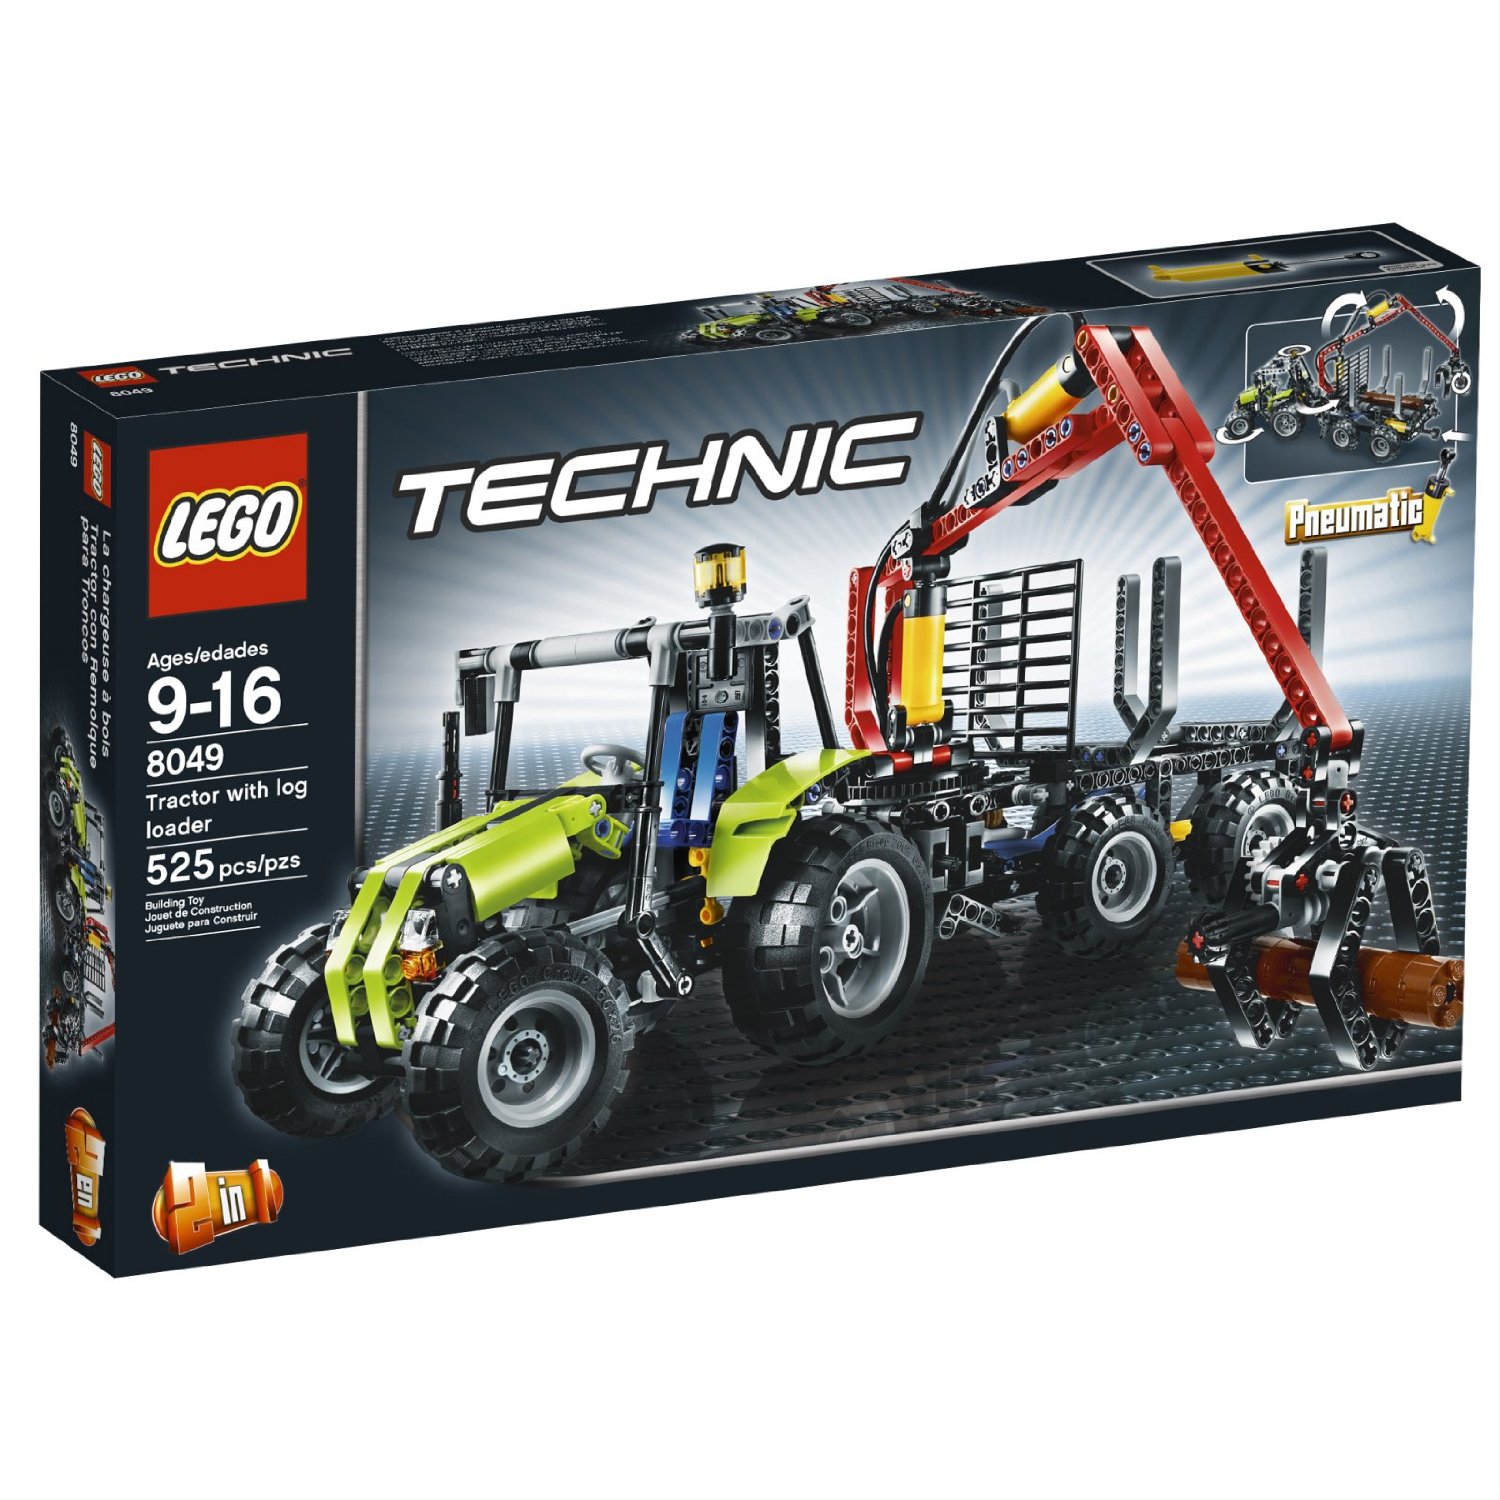 8049 - Tractor with Log Loader